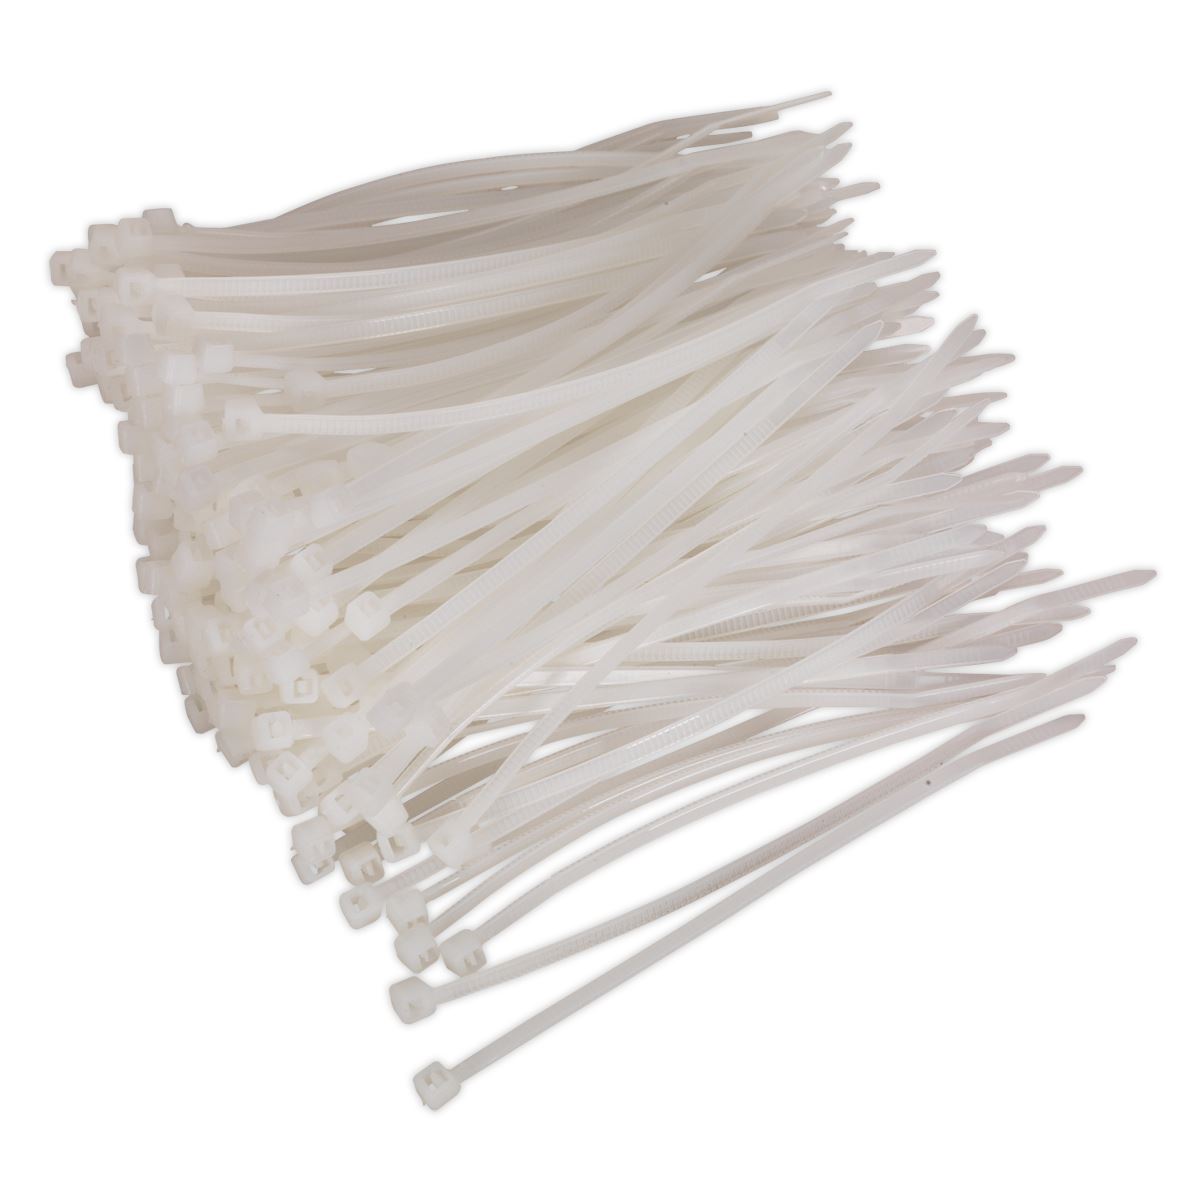 Sealey Cable Tie 100 x 2.5mm White Pack of 200